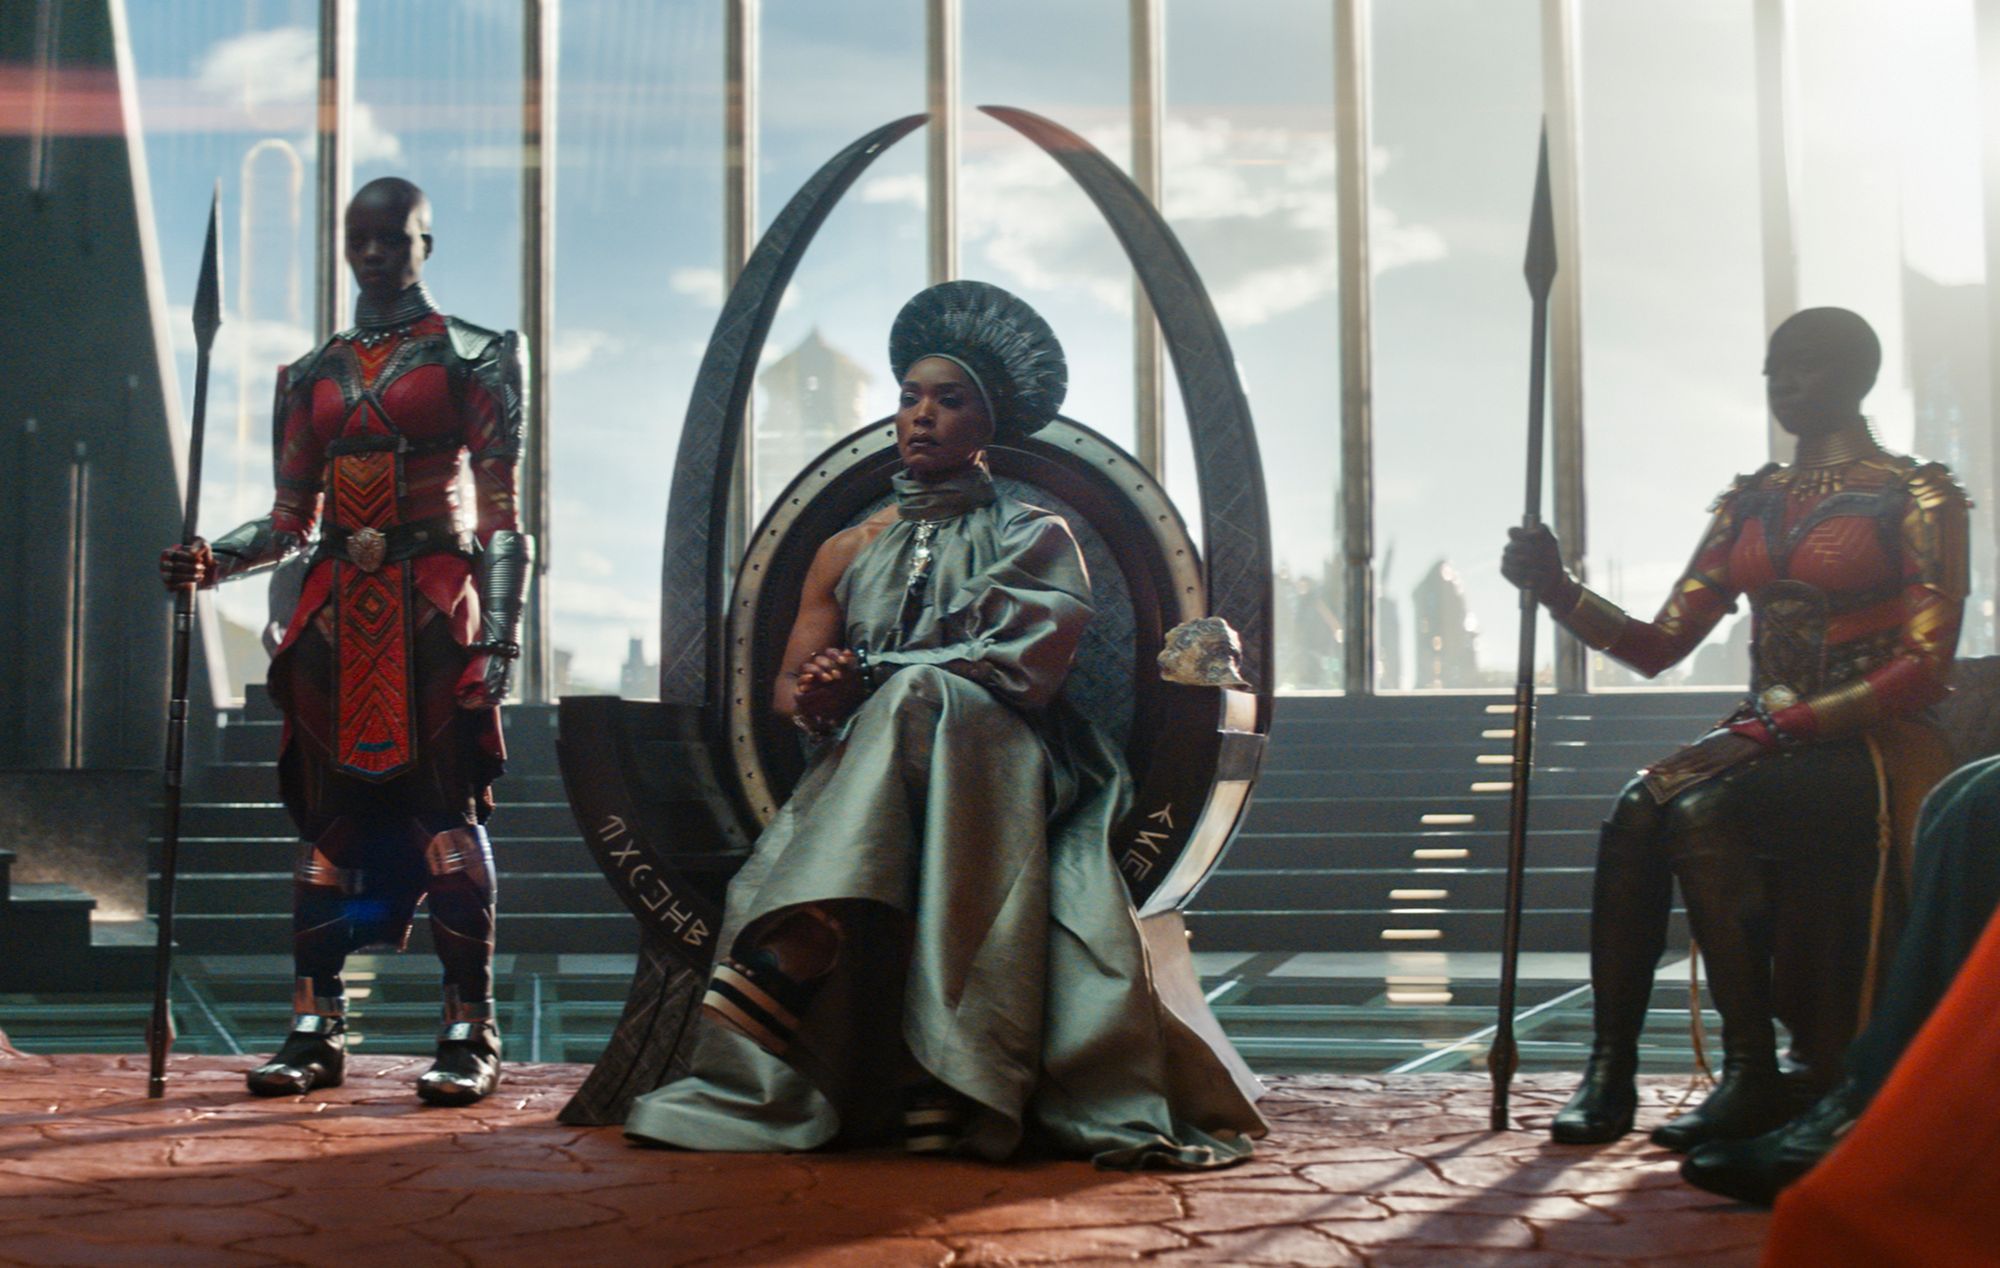 "Black Panther: Wakanda Forever", is gradually making its way to the $1 billion mark